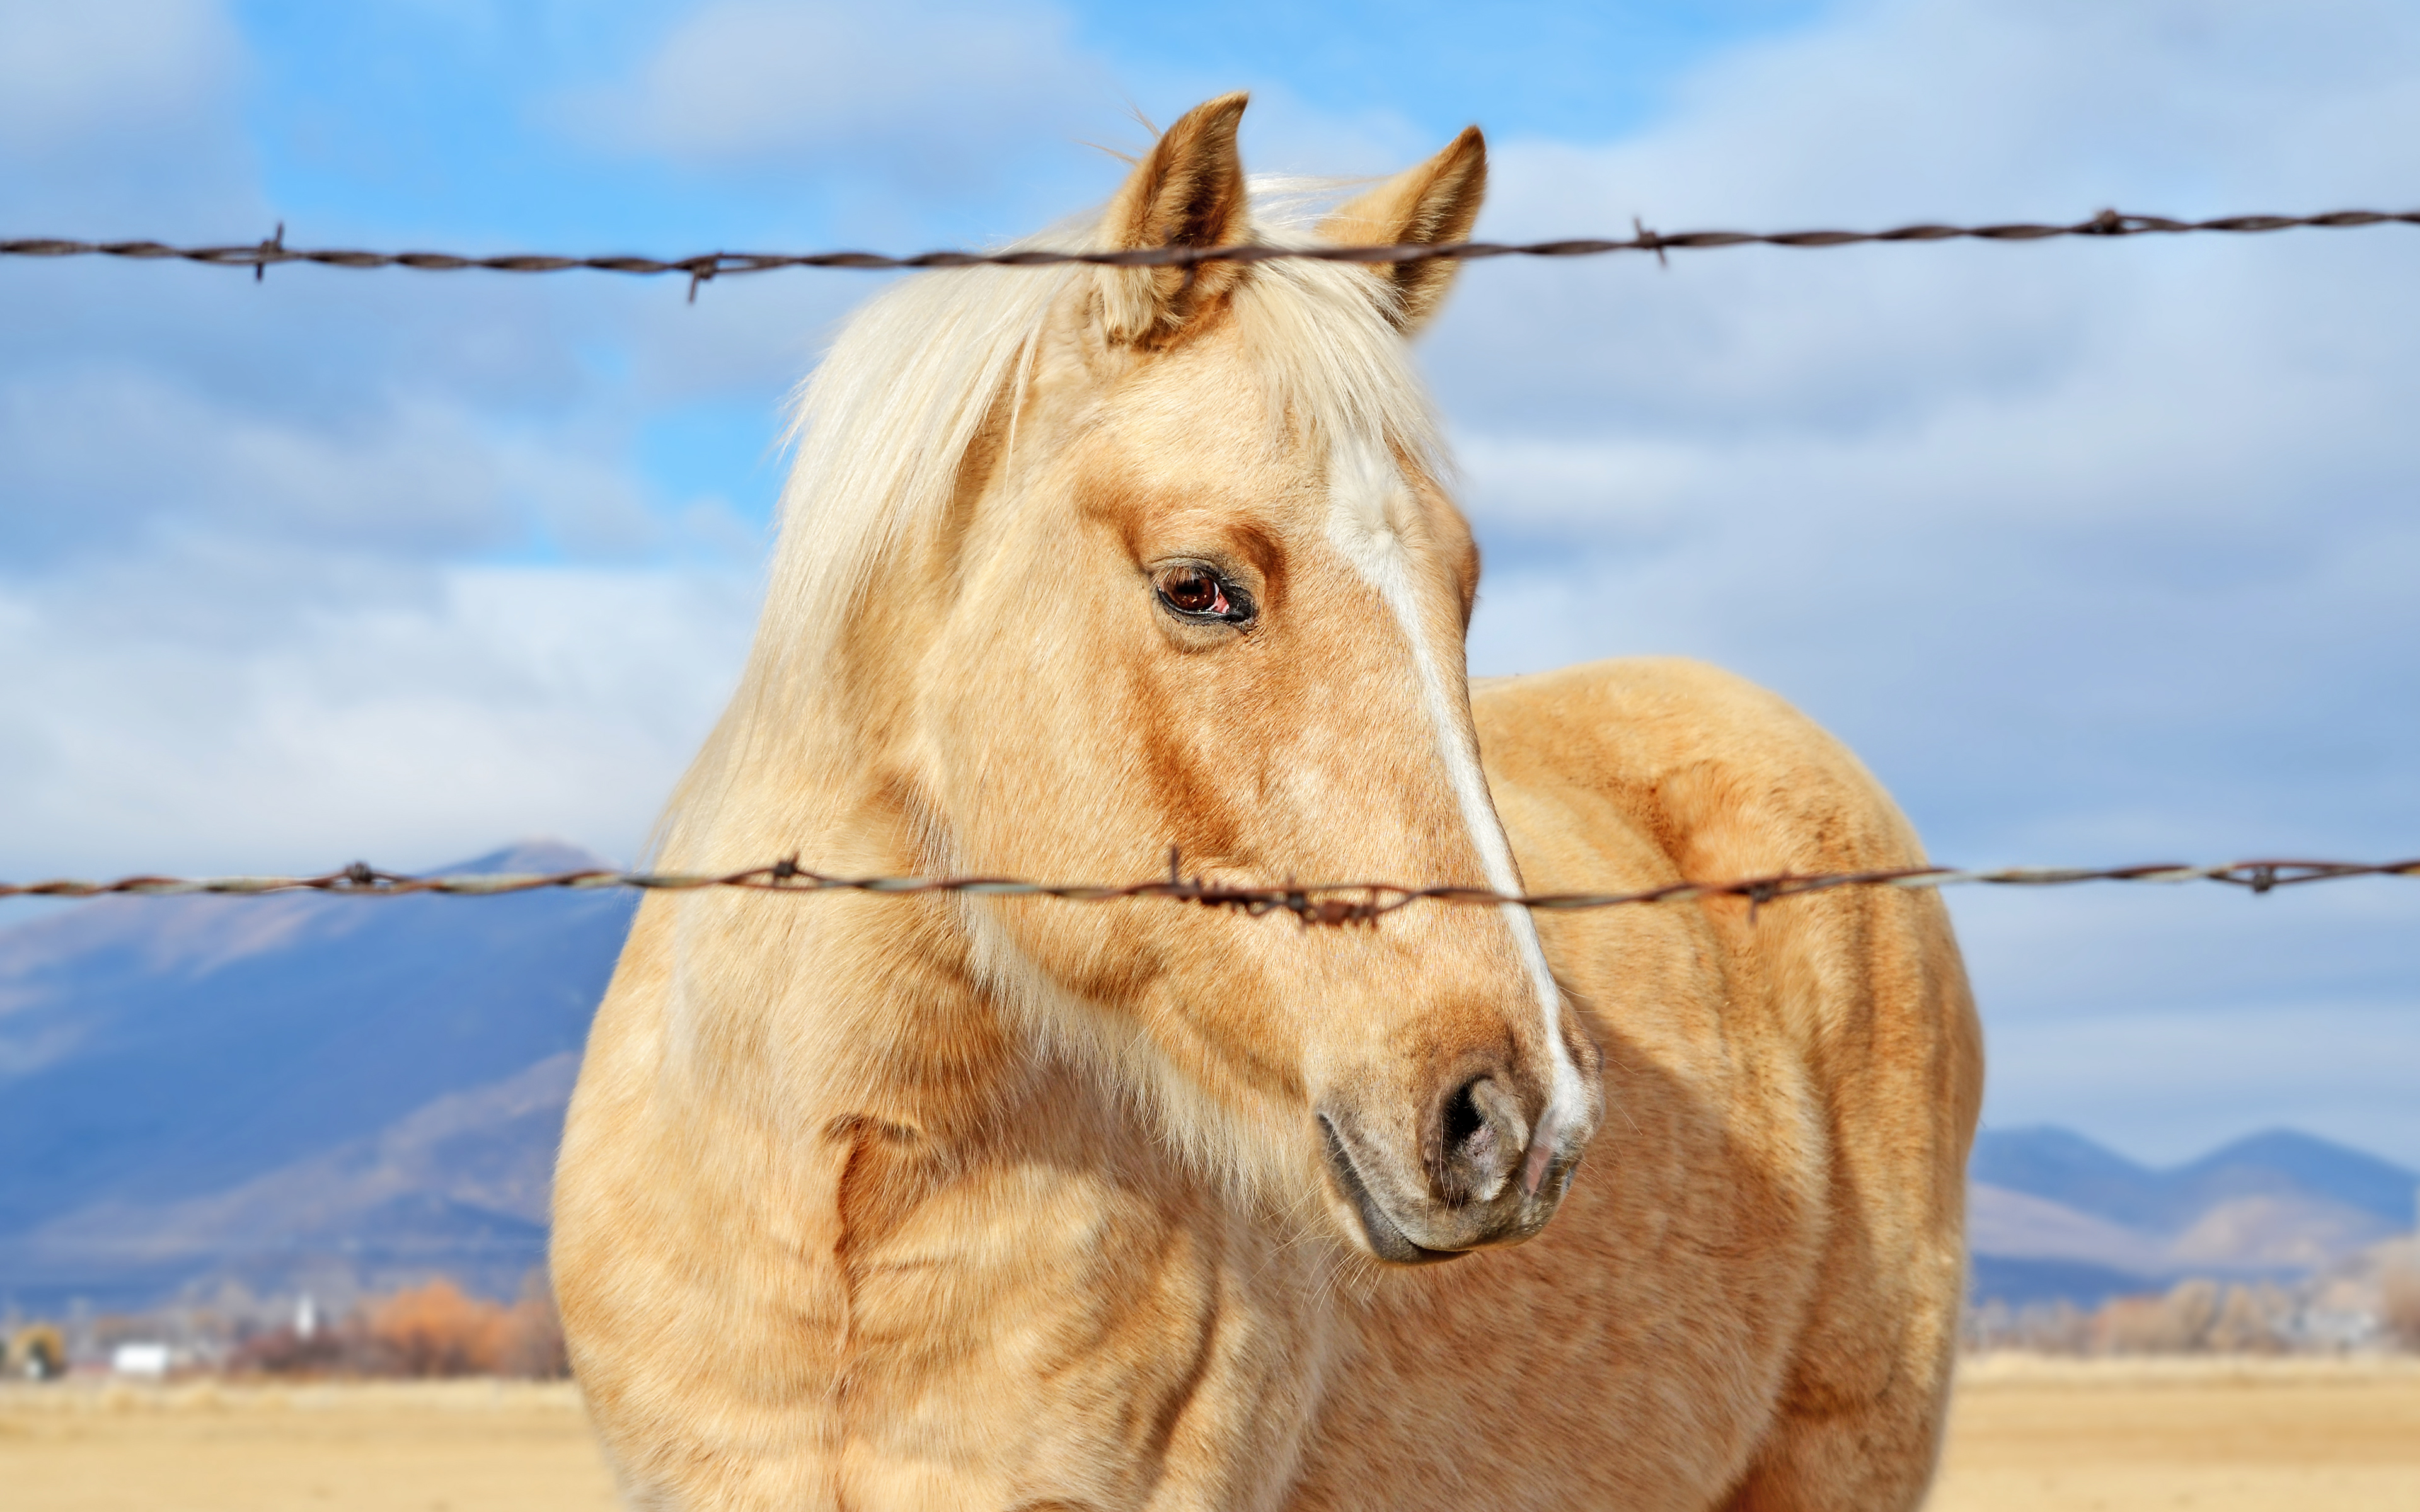 General 3840x2400 animals mammals fence outdoors sky horse clouds fur sunlight looking at viewer